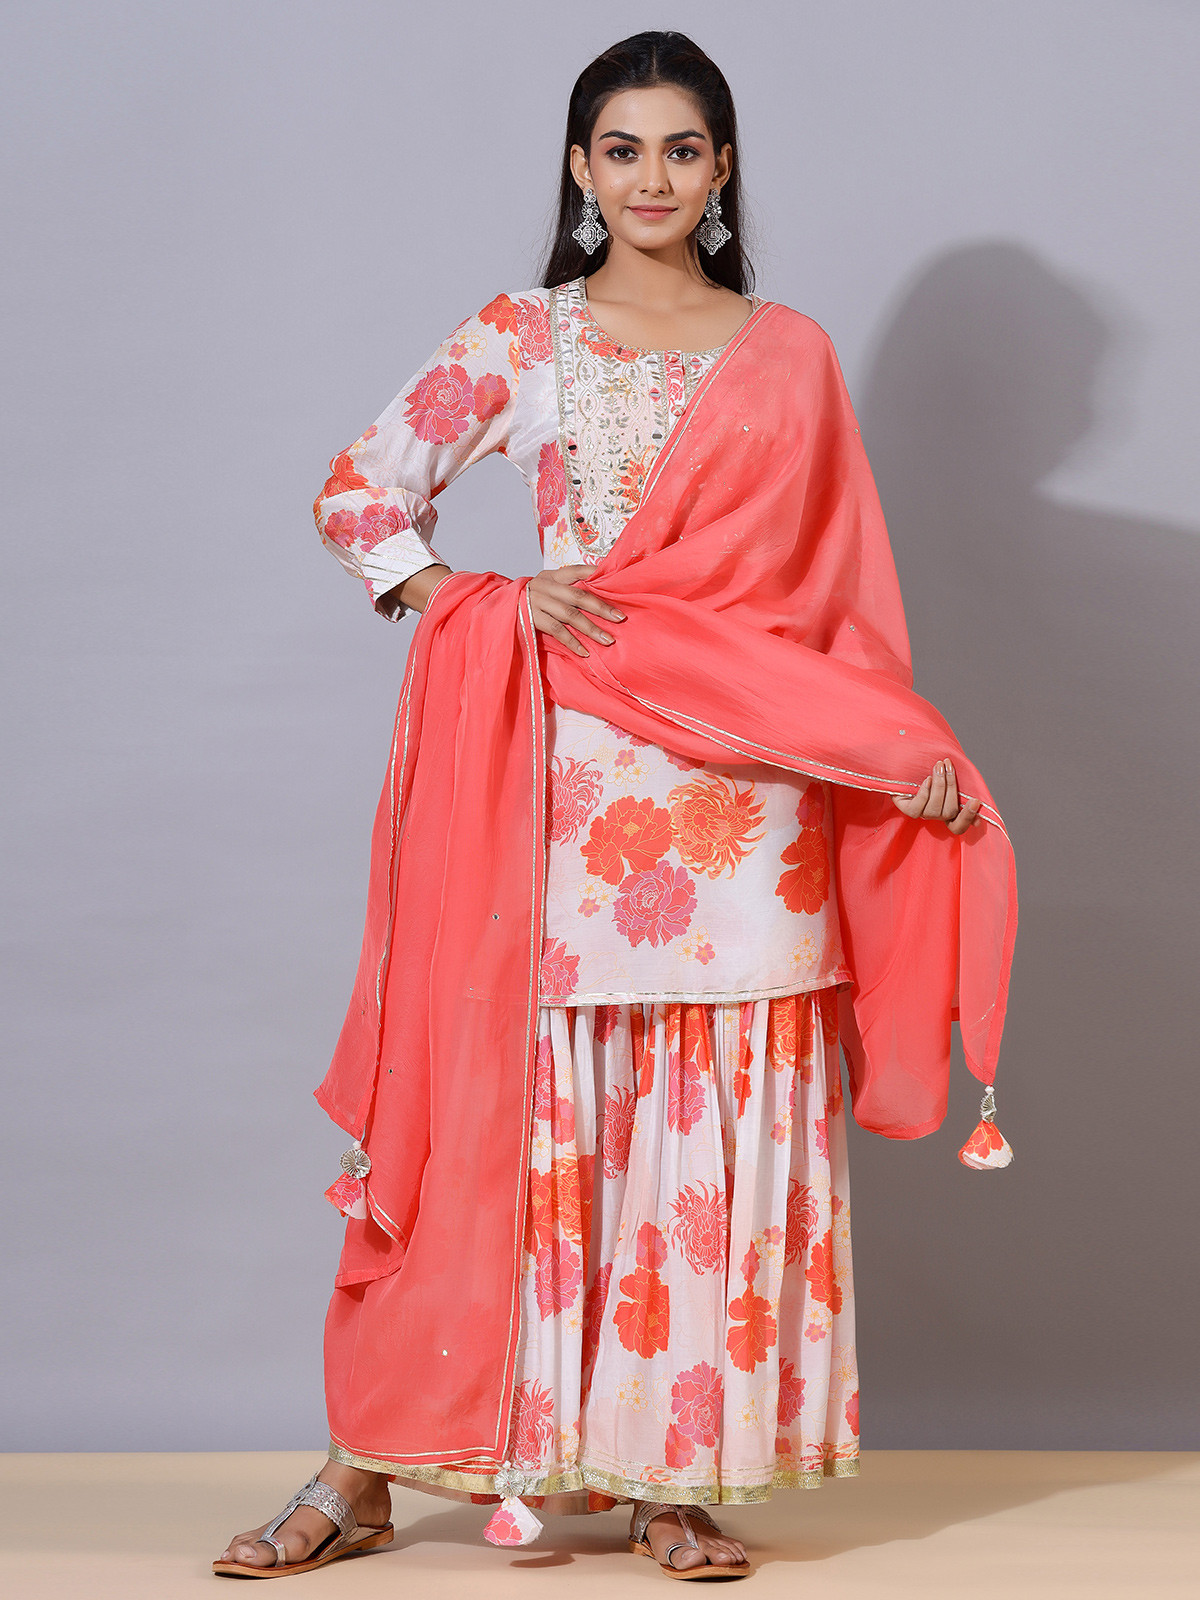 Floral palazzo set as eid outfits